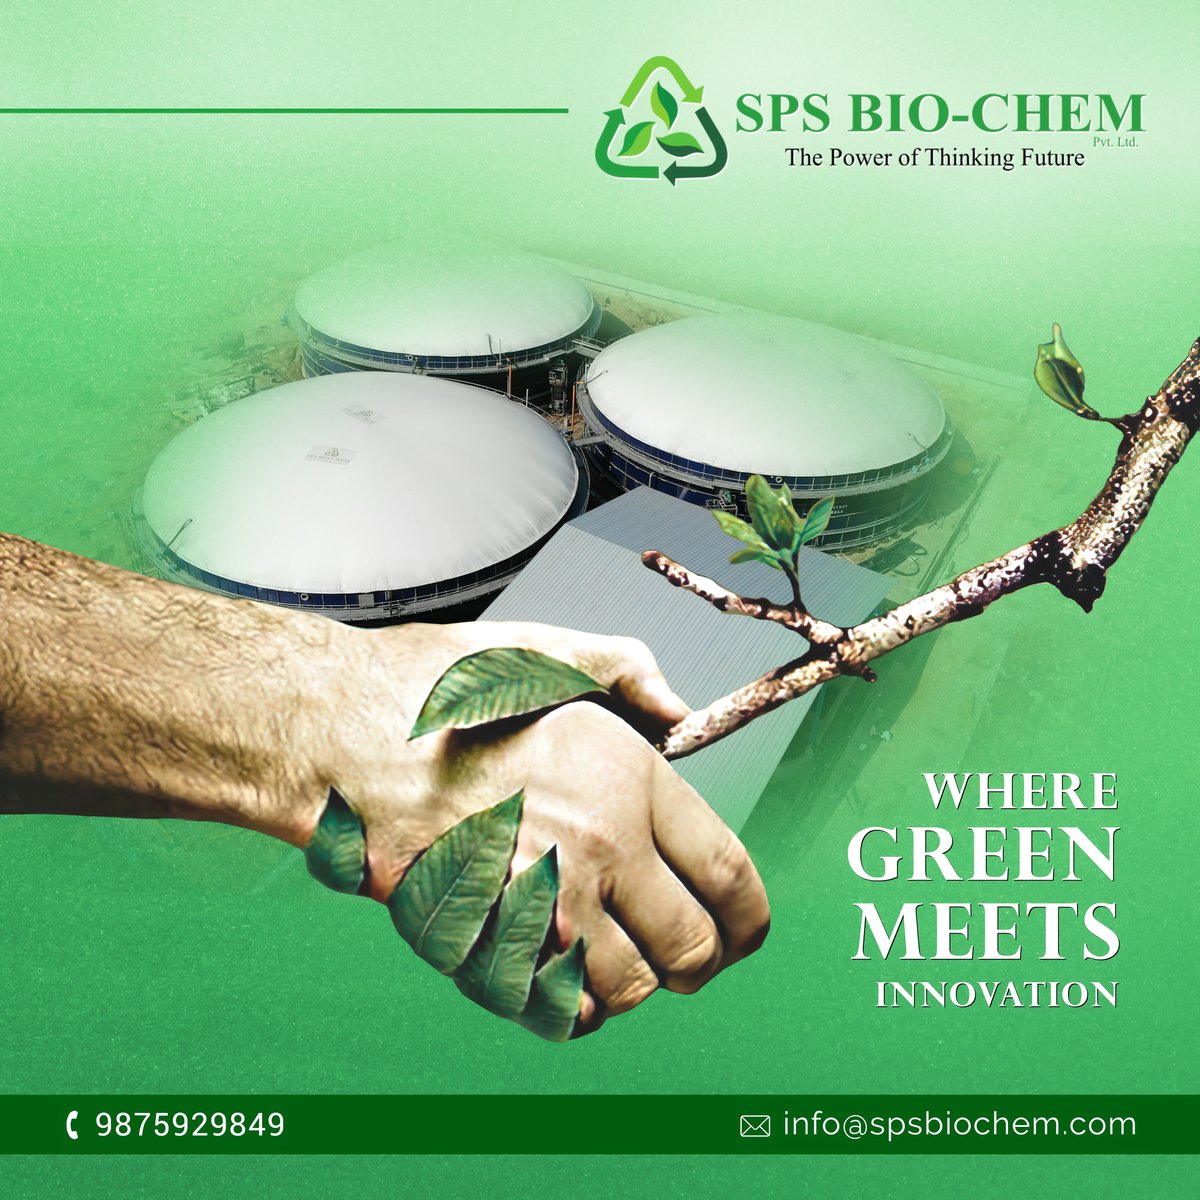 SPS BIO-CHEM is where Innovation and Green Energy intersect! Our cutting-edge facilities and sustainable practices enable us to manufacture high-quality biochemicals with minimal environmental impact. Join us on our journey towards a greener future. #biochem #organicfarming